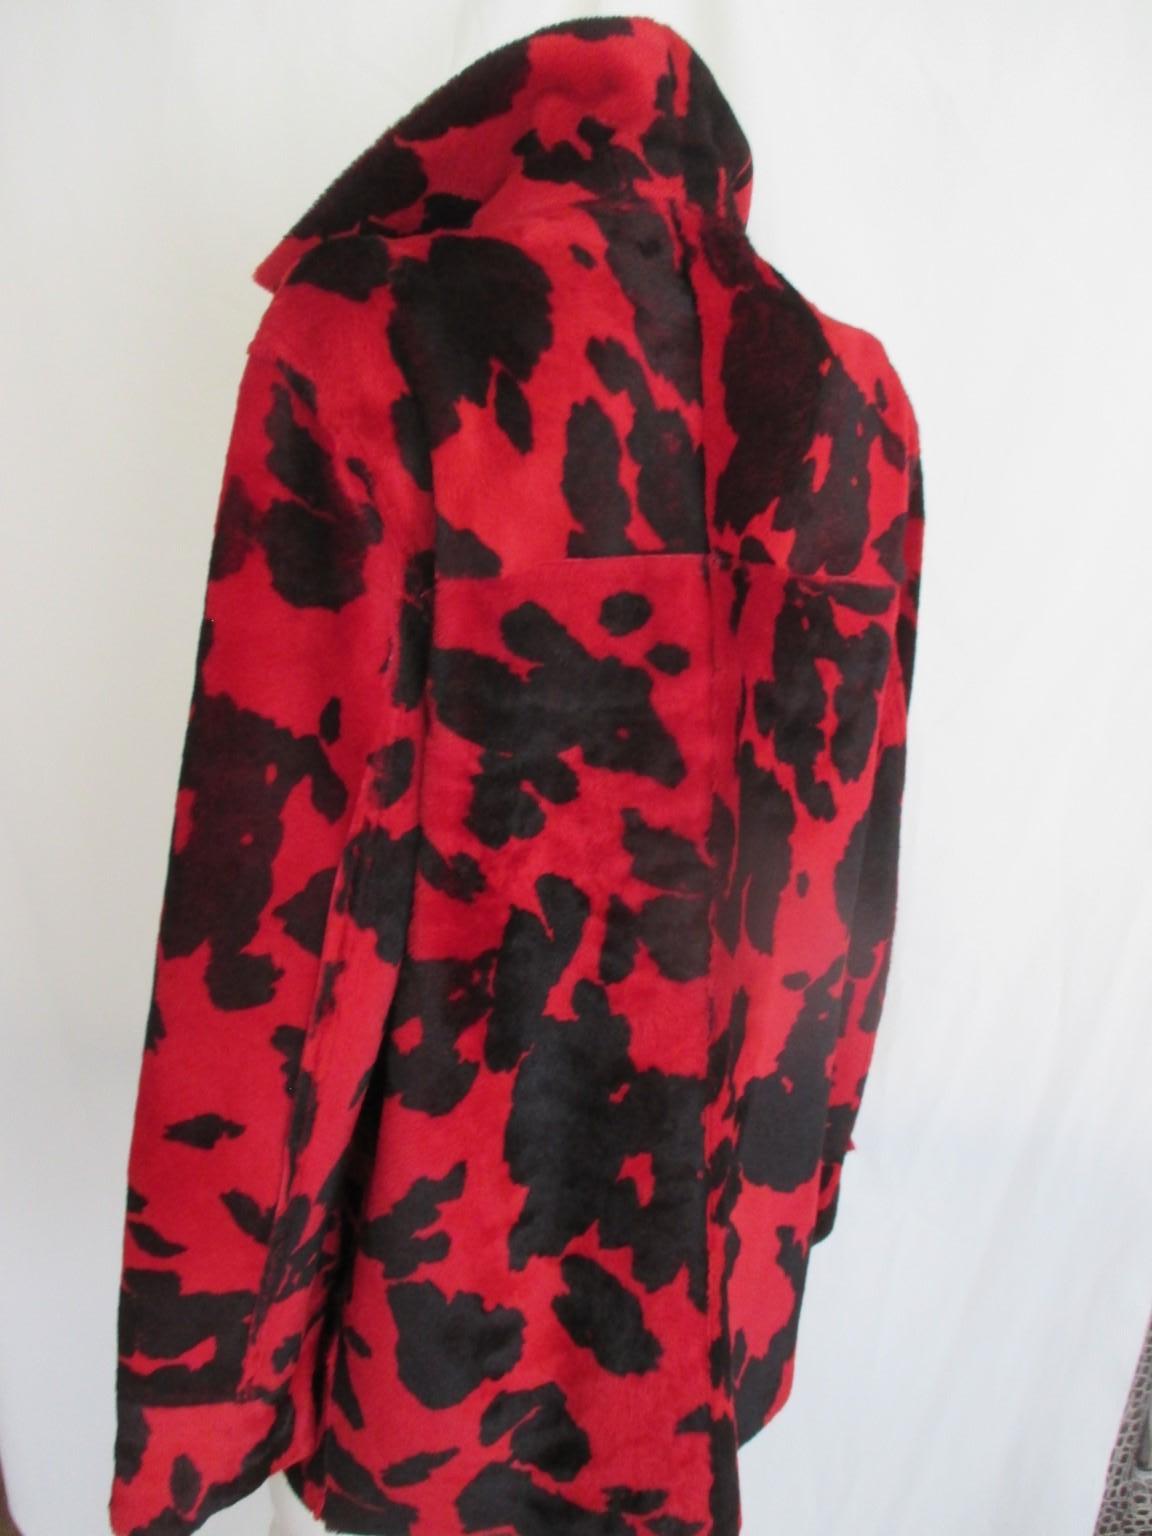 Red Animal Printed Lambskin Leather Coat Reversible In Good Condition For Sale In Amsterdam, NL